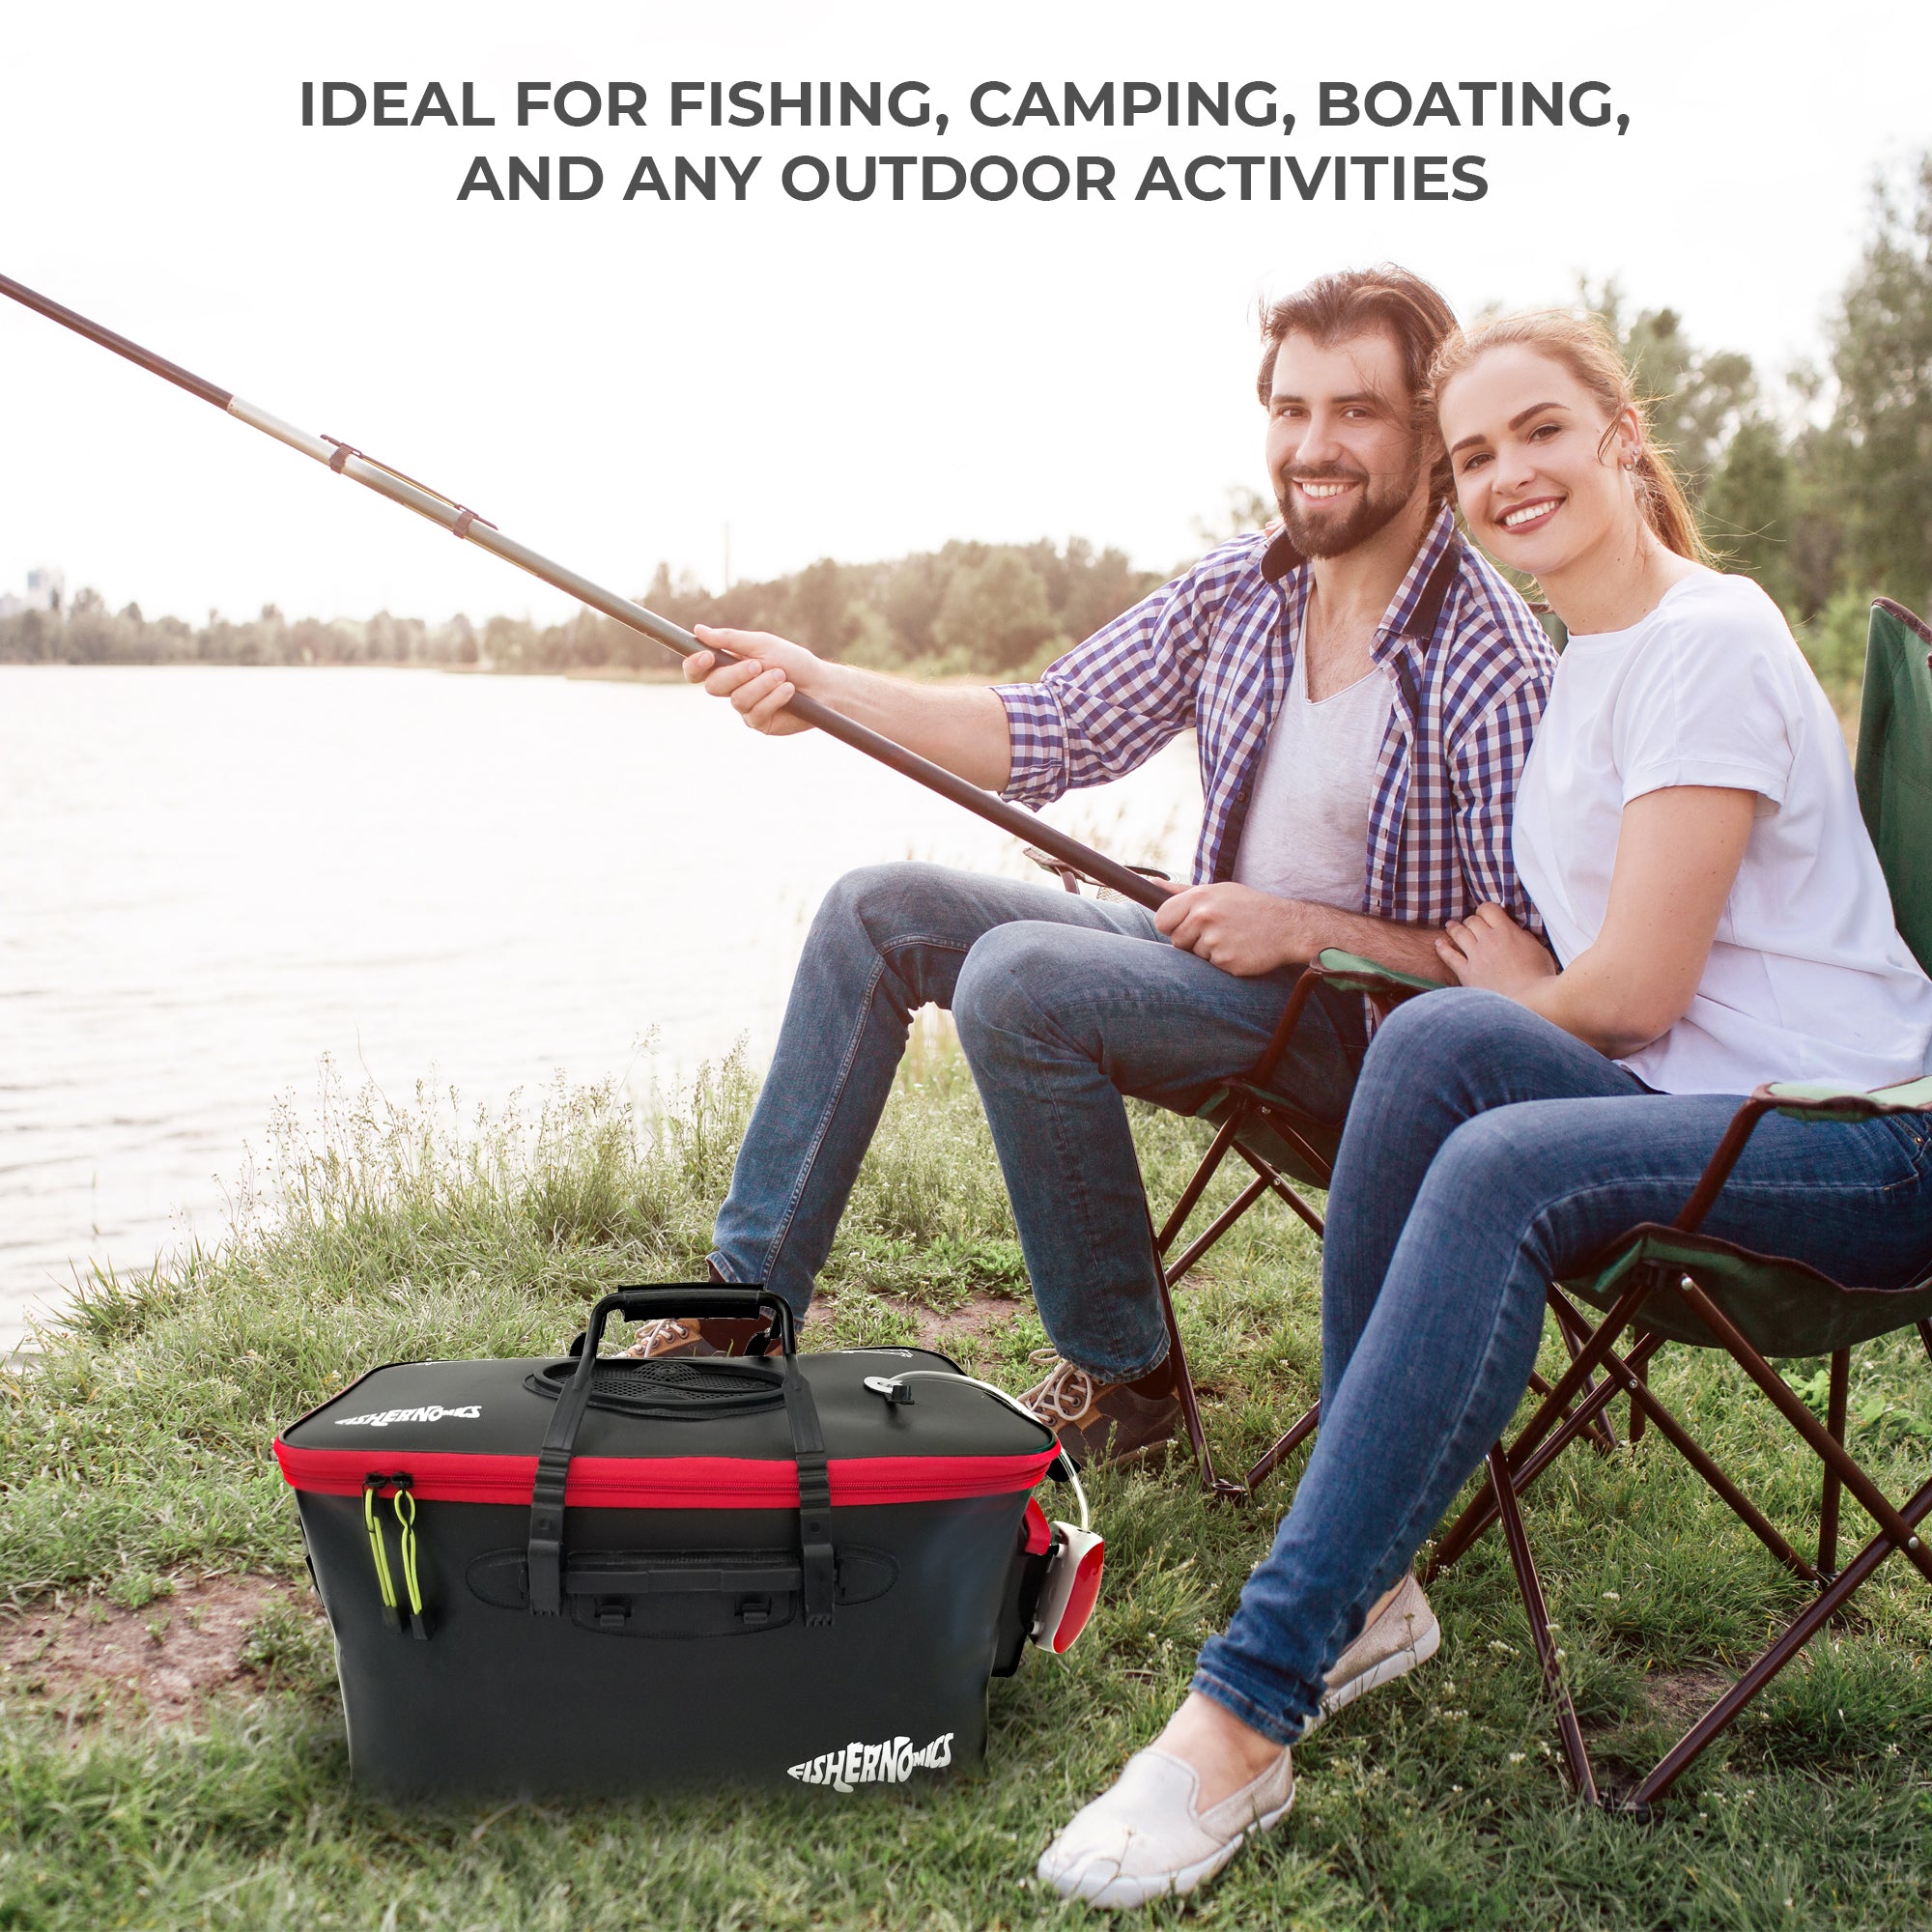 Peggybuy Portable Live Fish Bucket Outdoor Camping Fishing Tackle Storage Tool Other